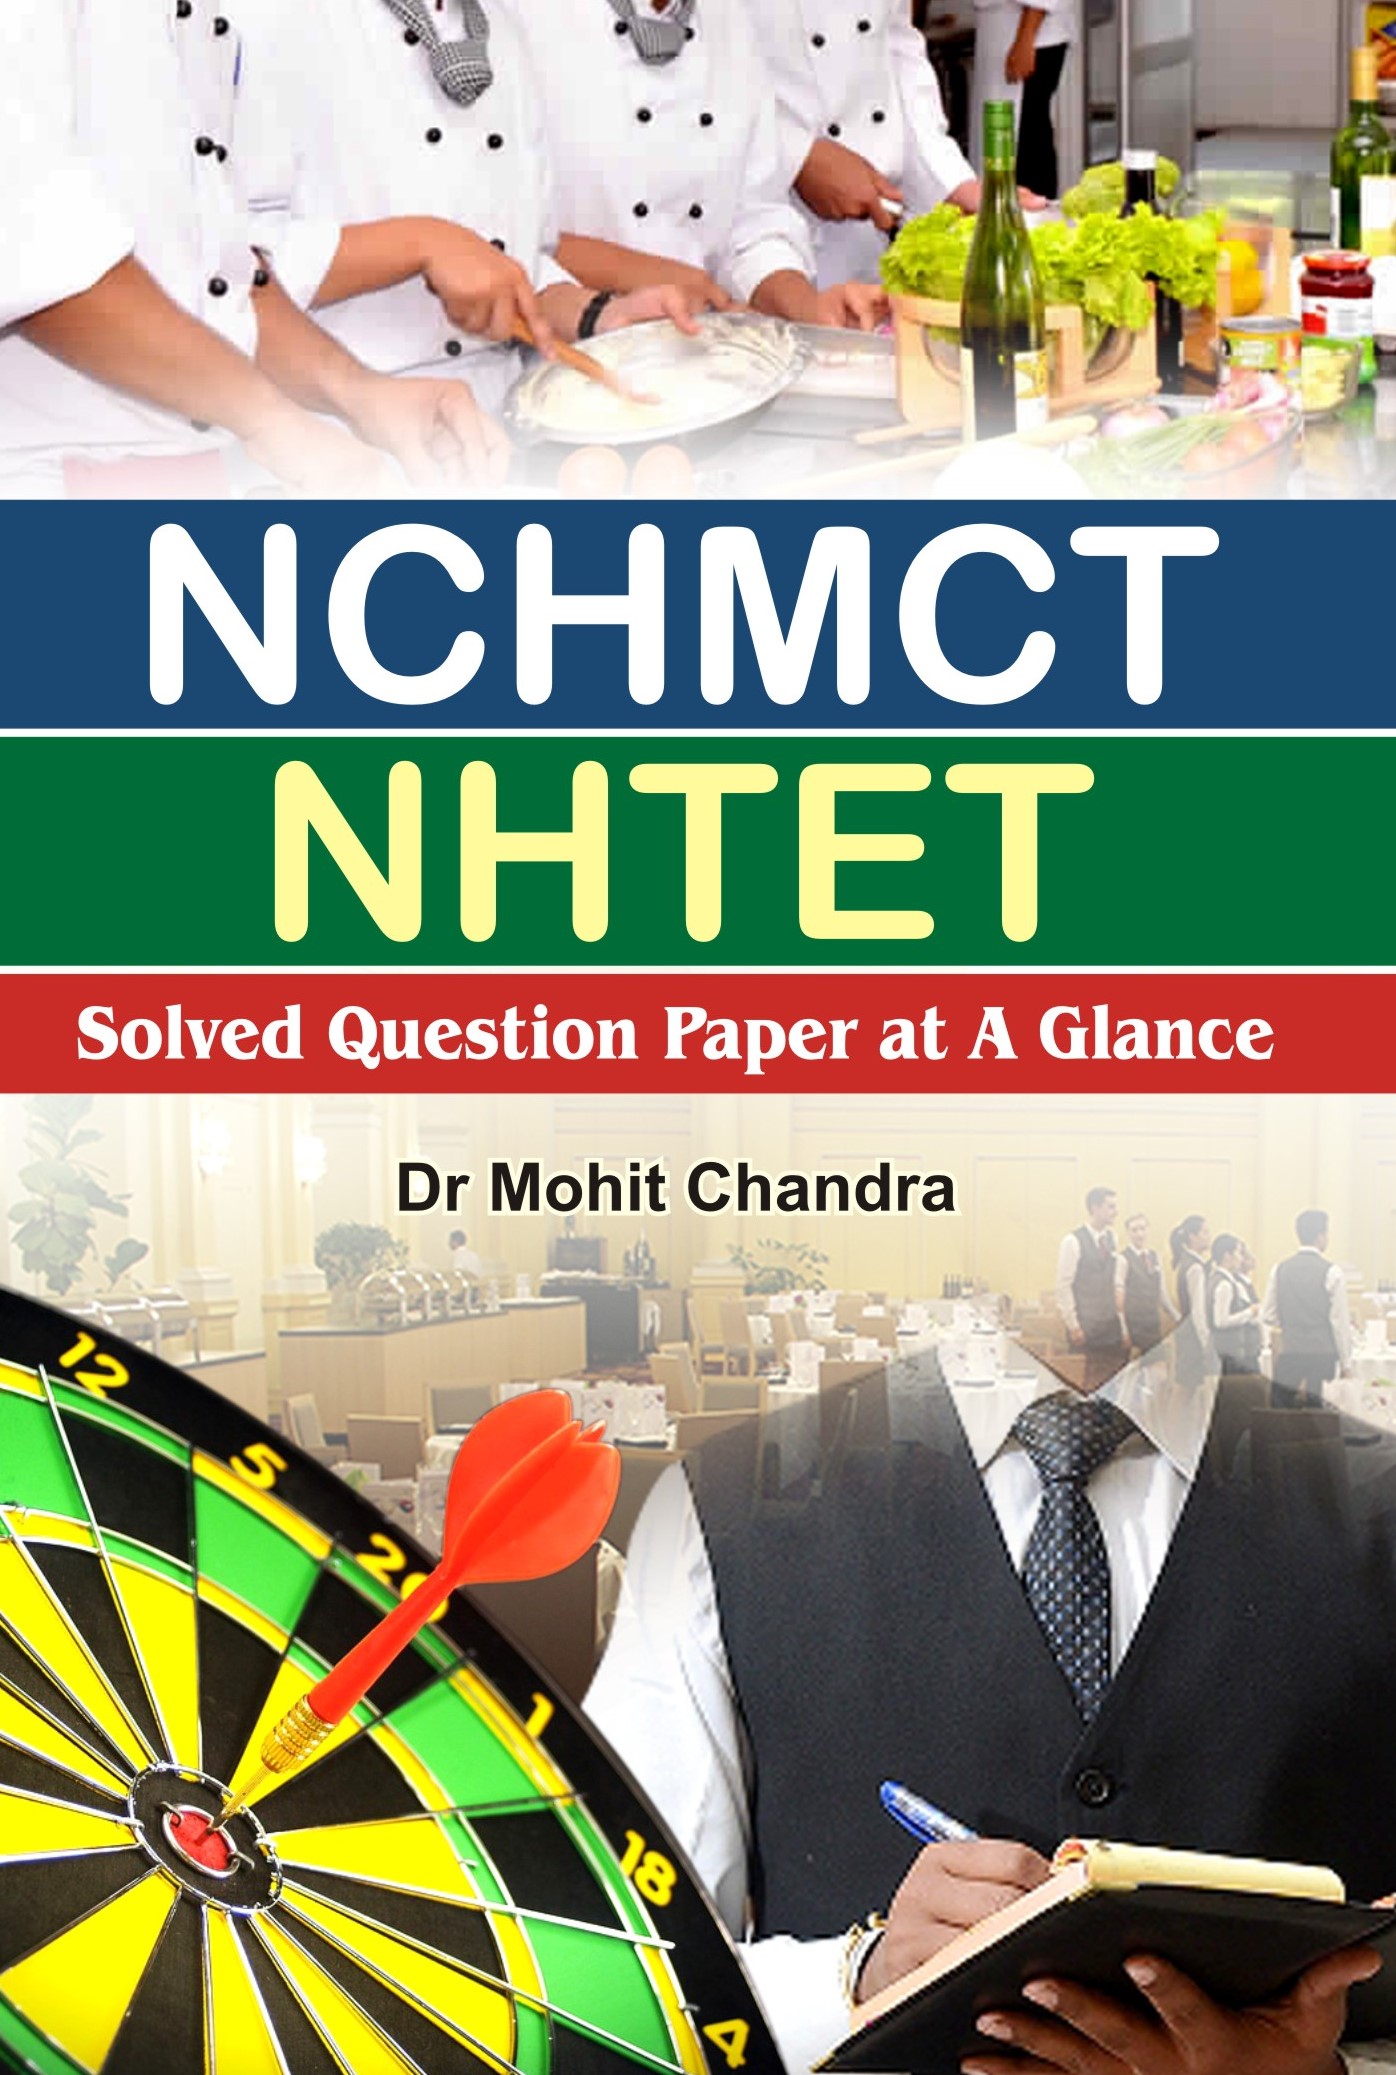 NCHMCT NHTET SOLVED QUESTION PAPER AT A GLANCE